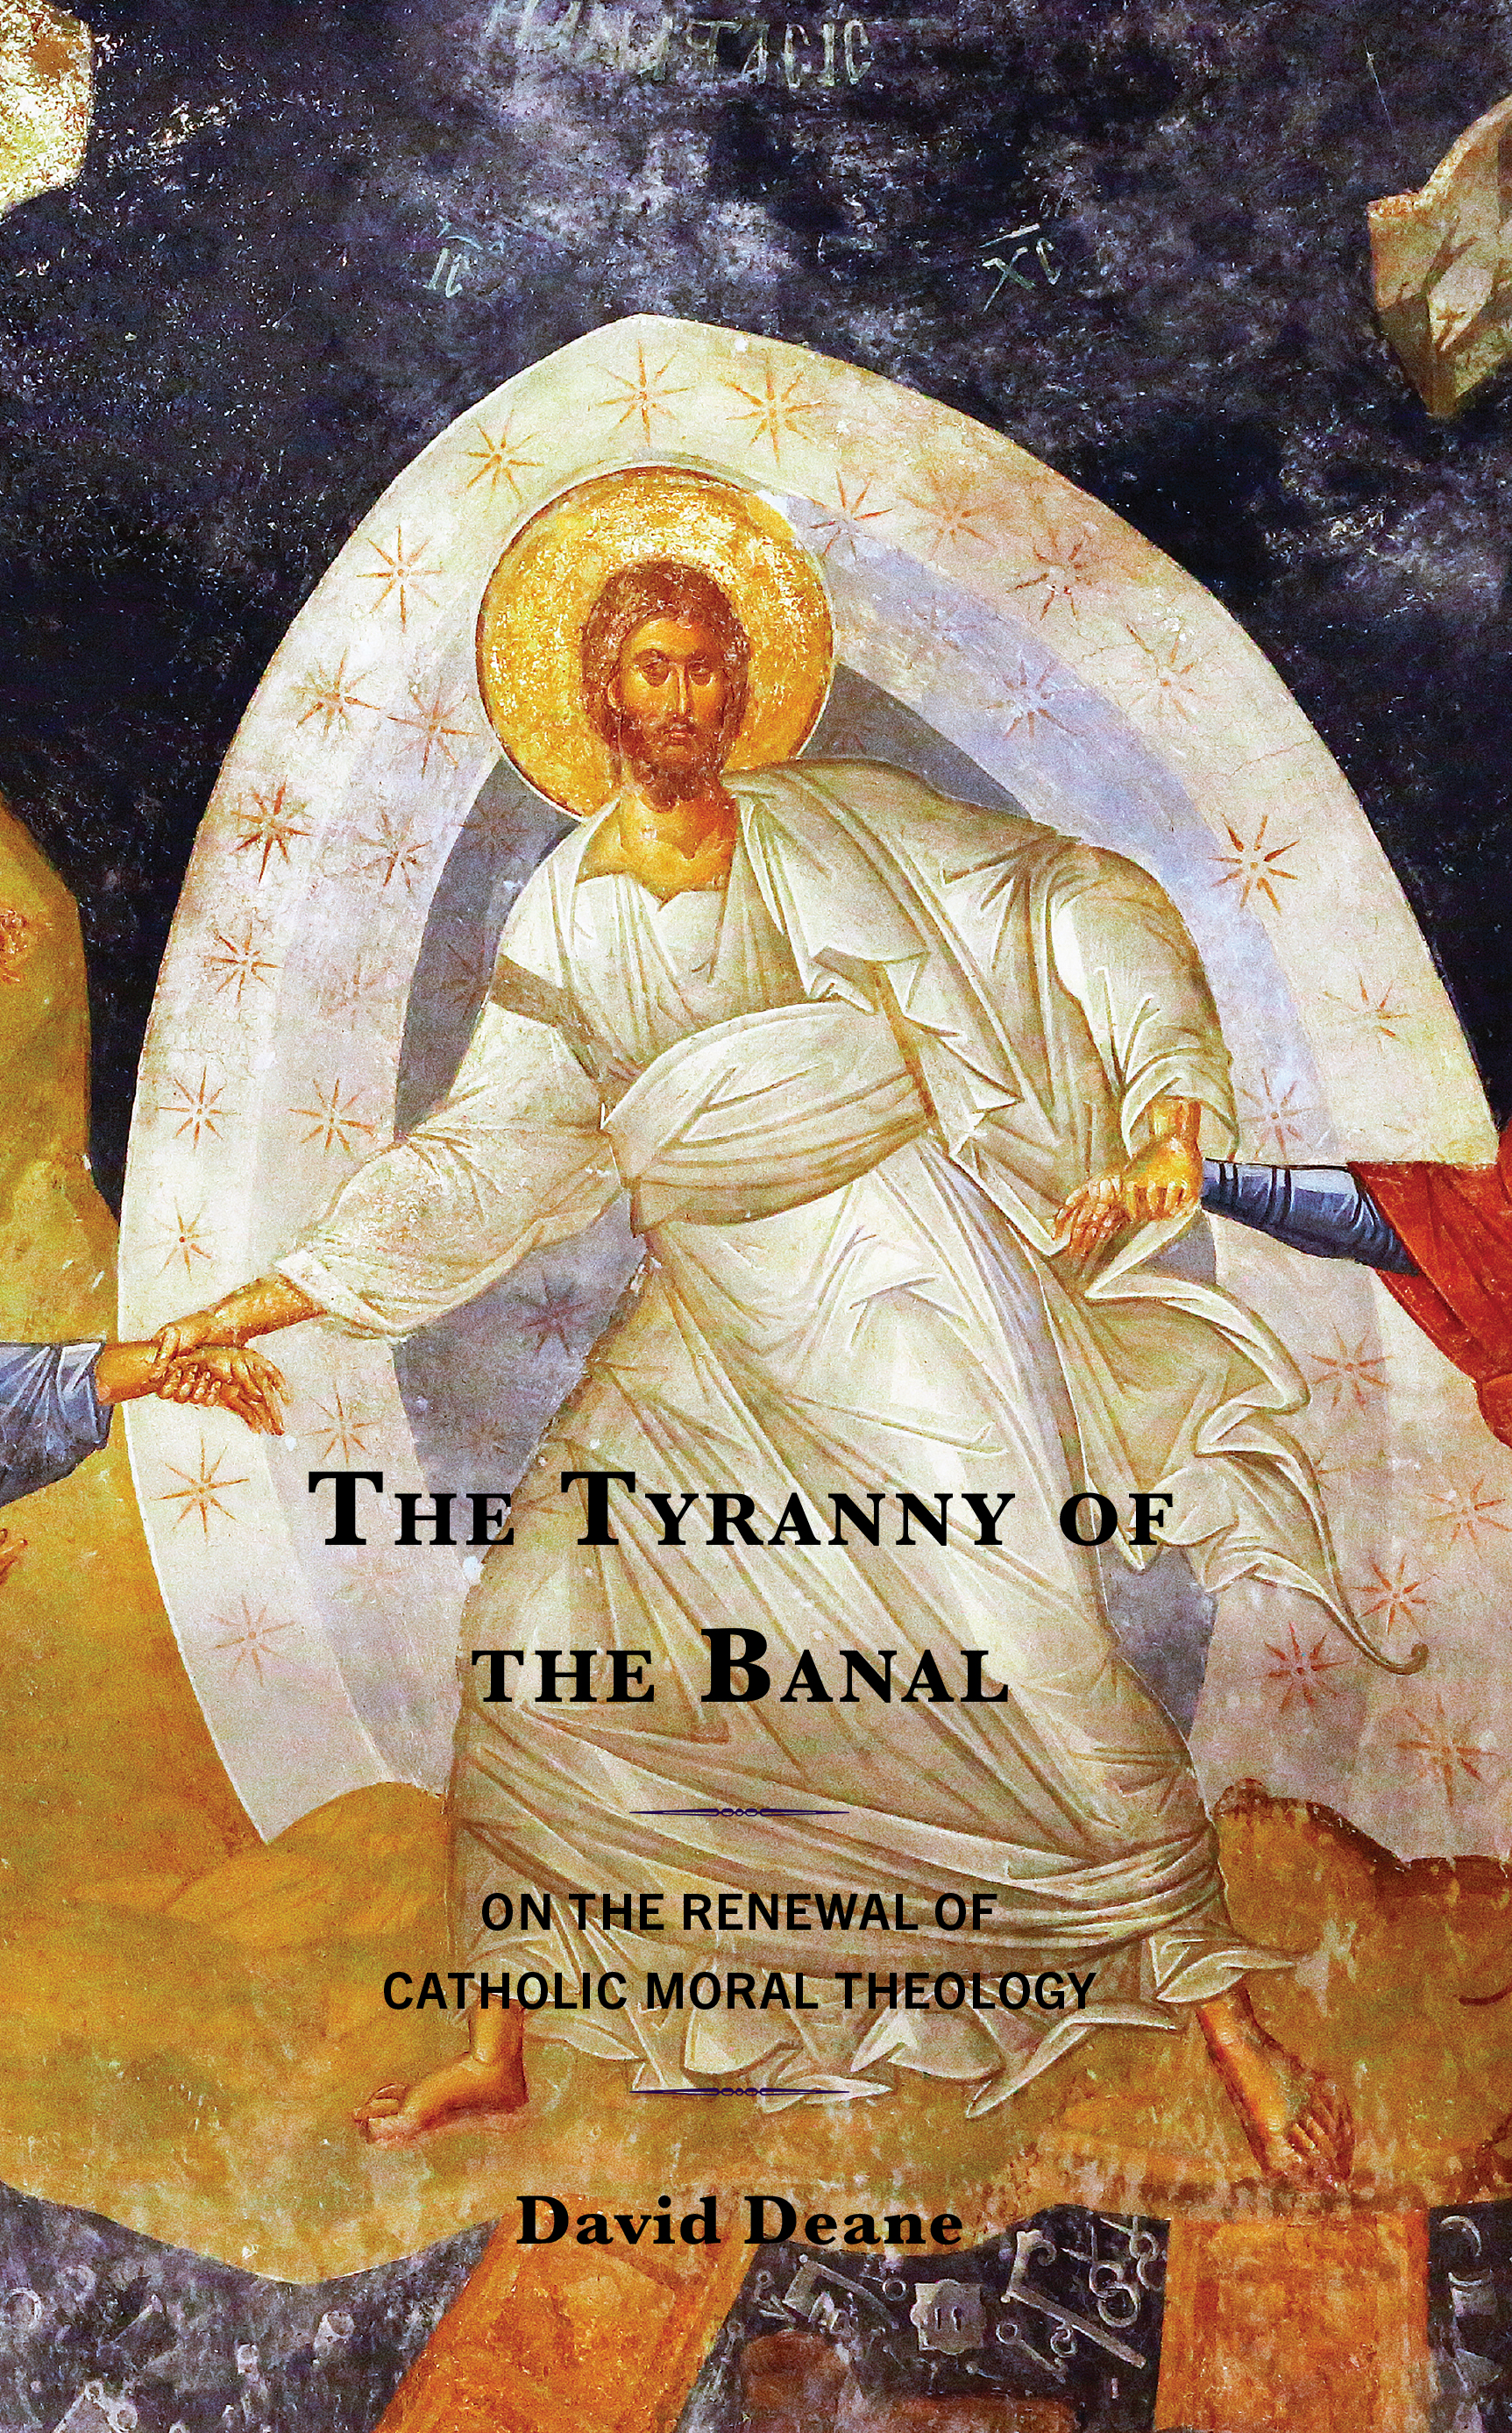 The Tyranny of the Banal: On the Renewal of Catholic Moral Theology